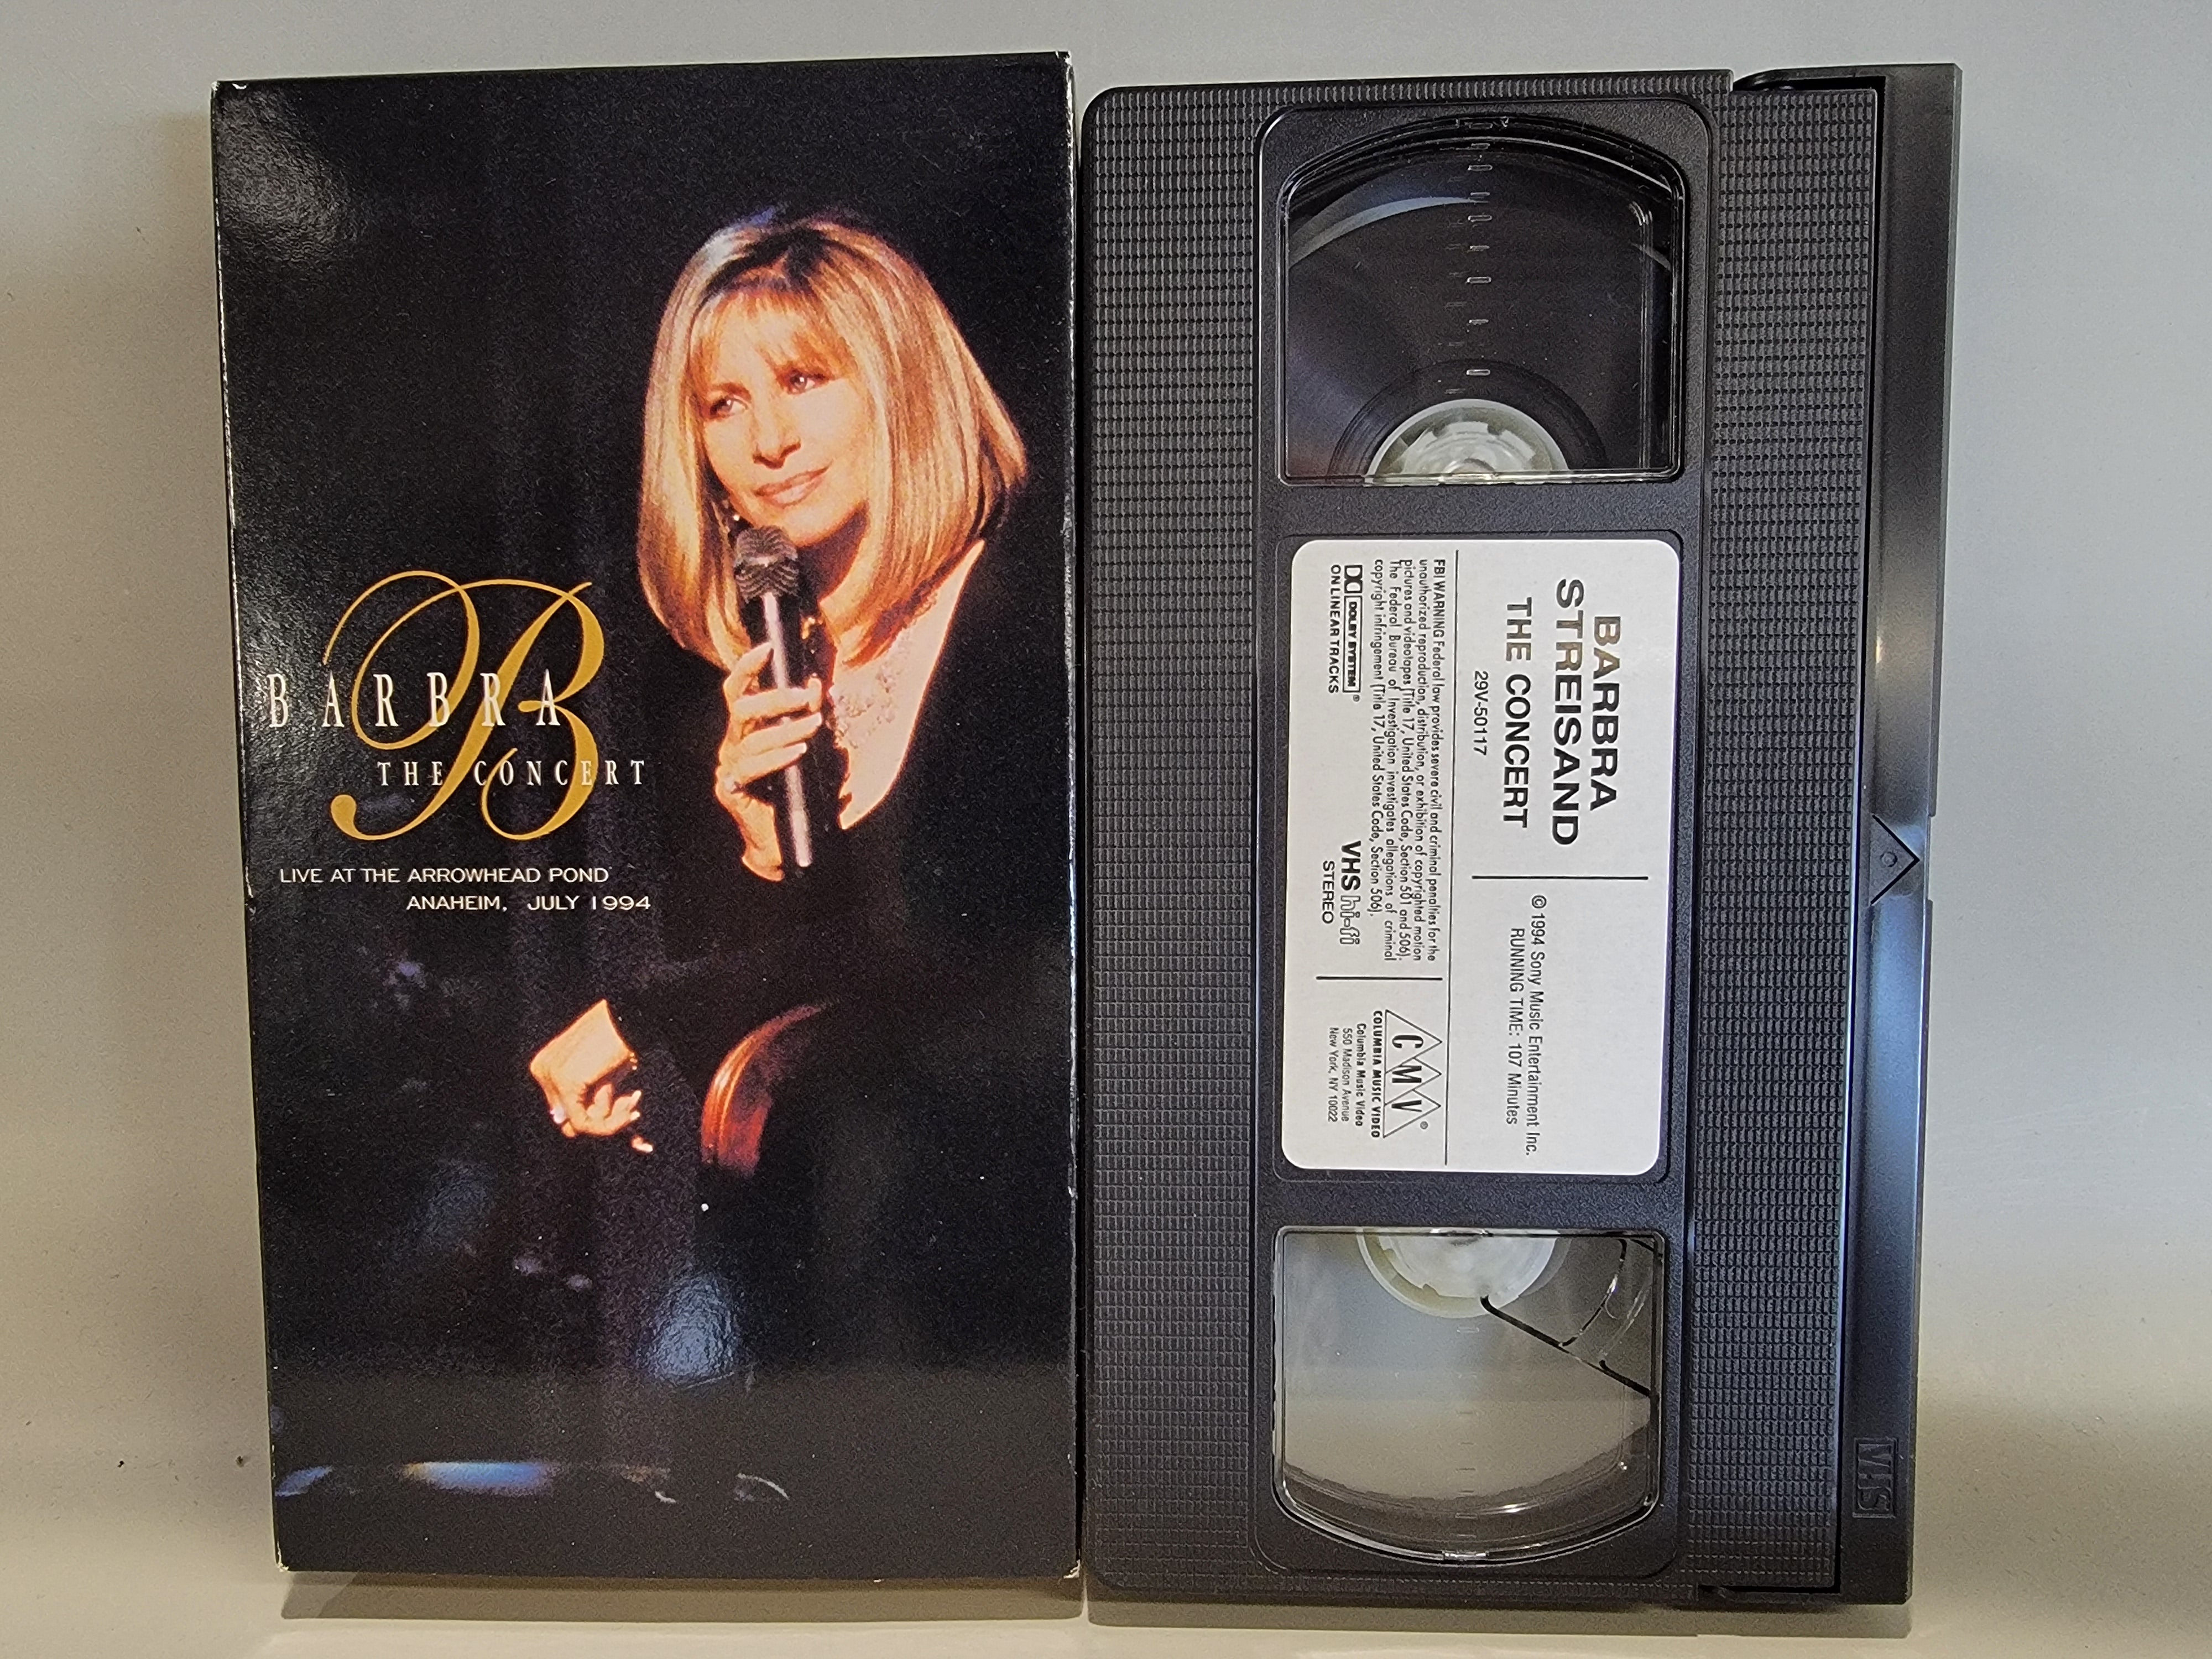 BARBARA STREISAND: THE CONCERT VHS [USED]